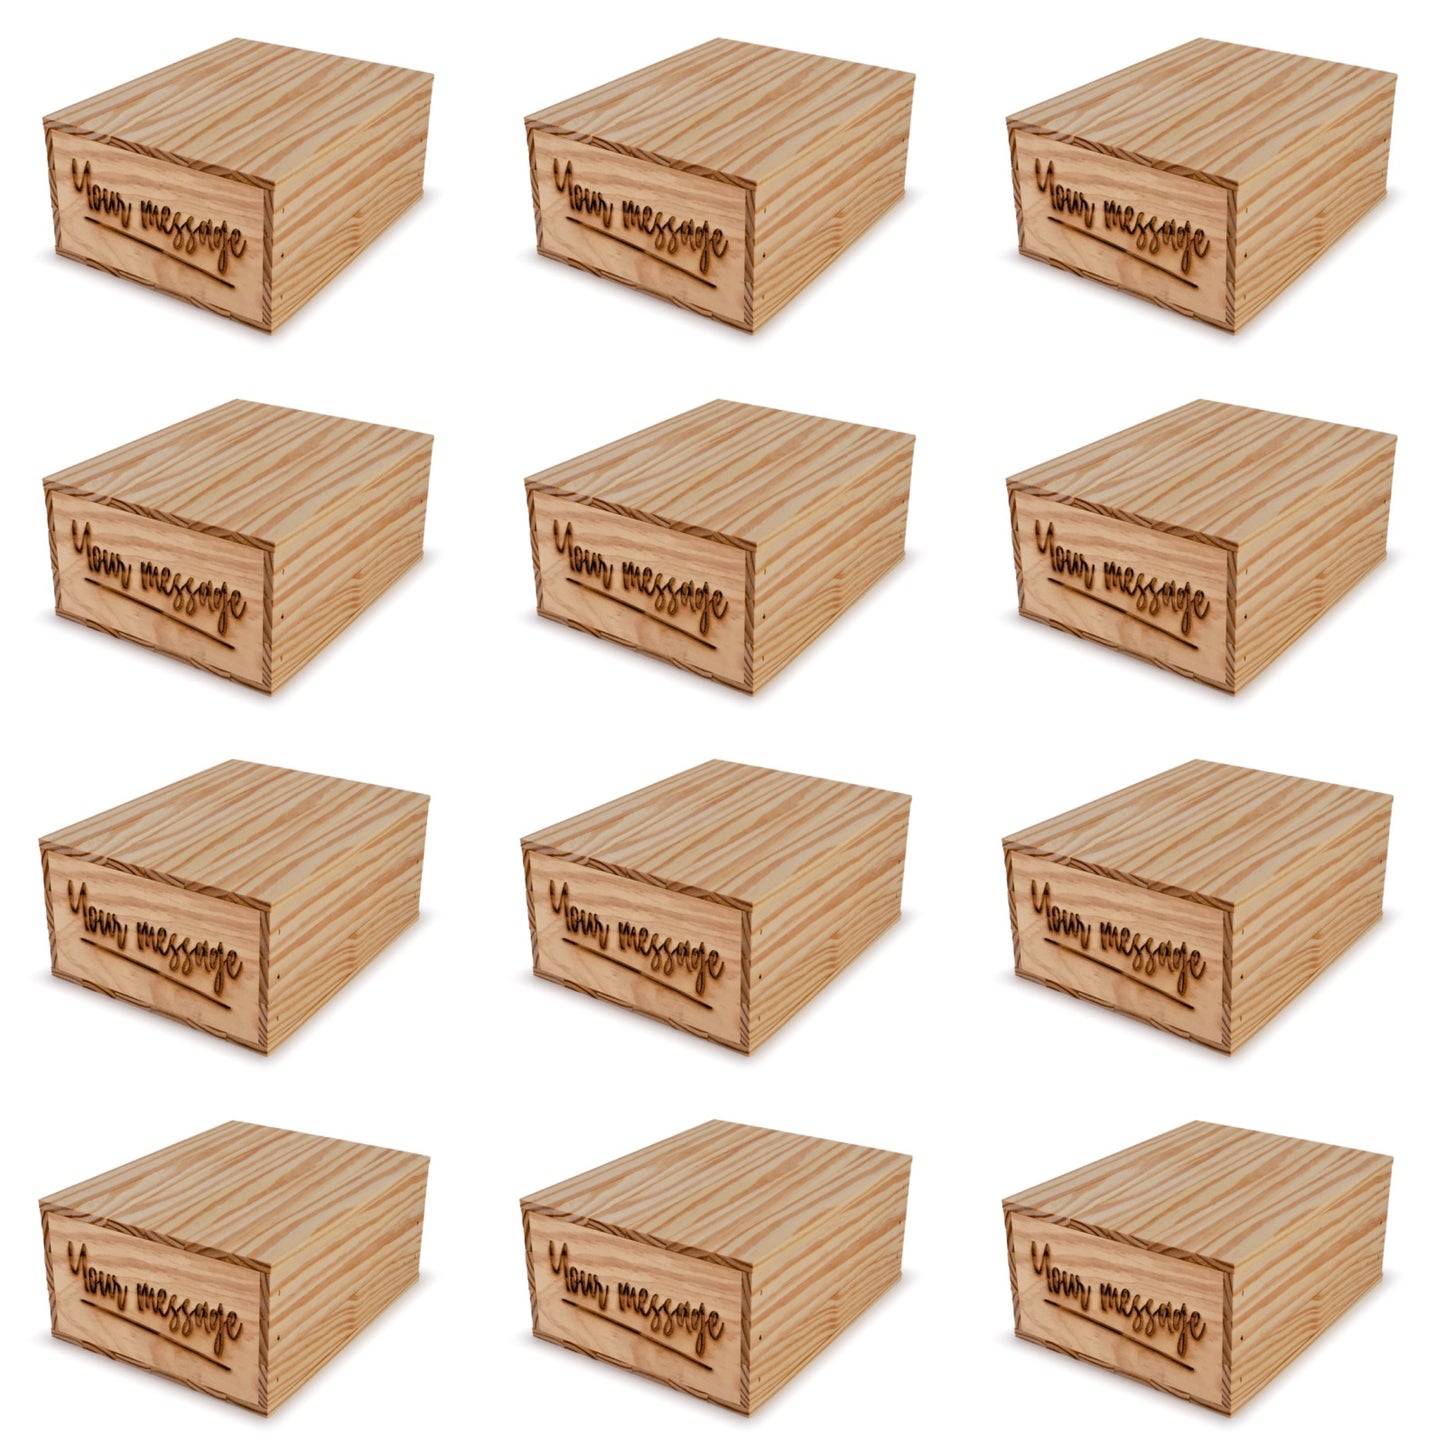 12 Small wooden crates with lid and custom message 12x9.75x5.25